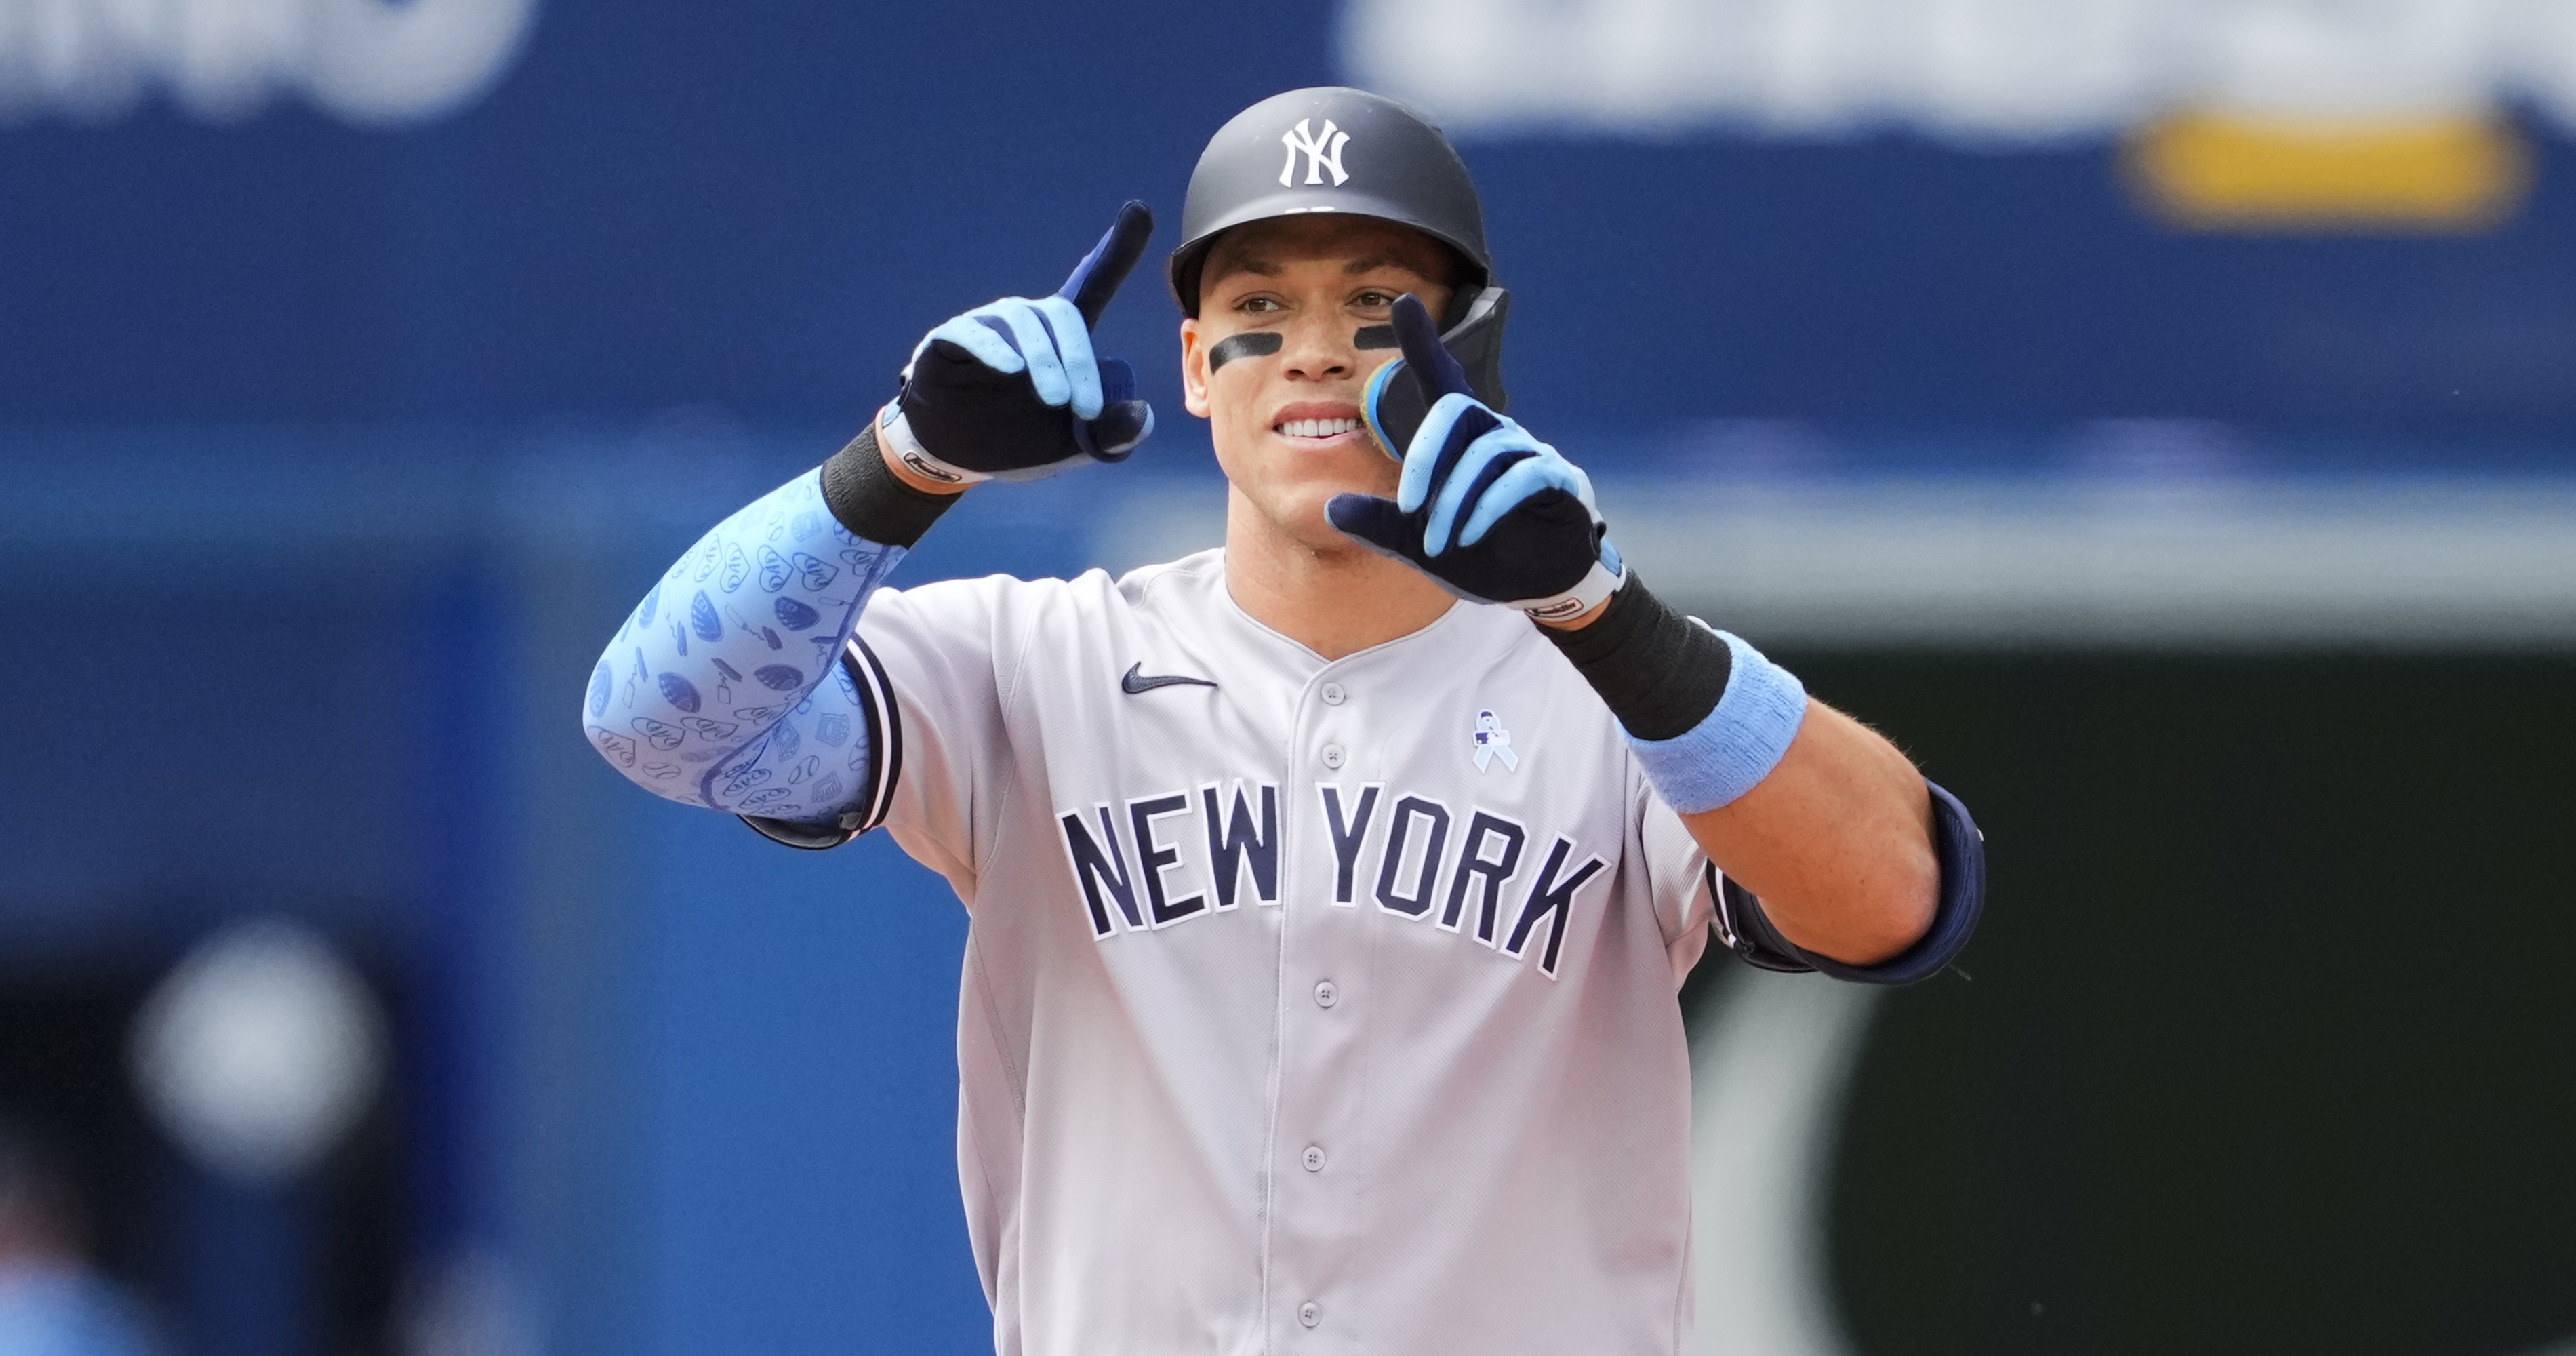 Nah, no need - Aaron Judge not seeking legal action against